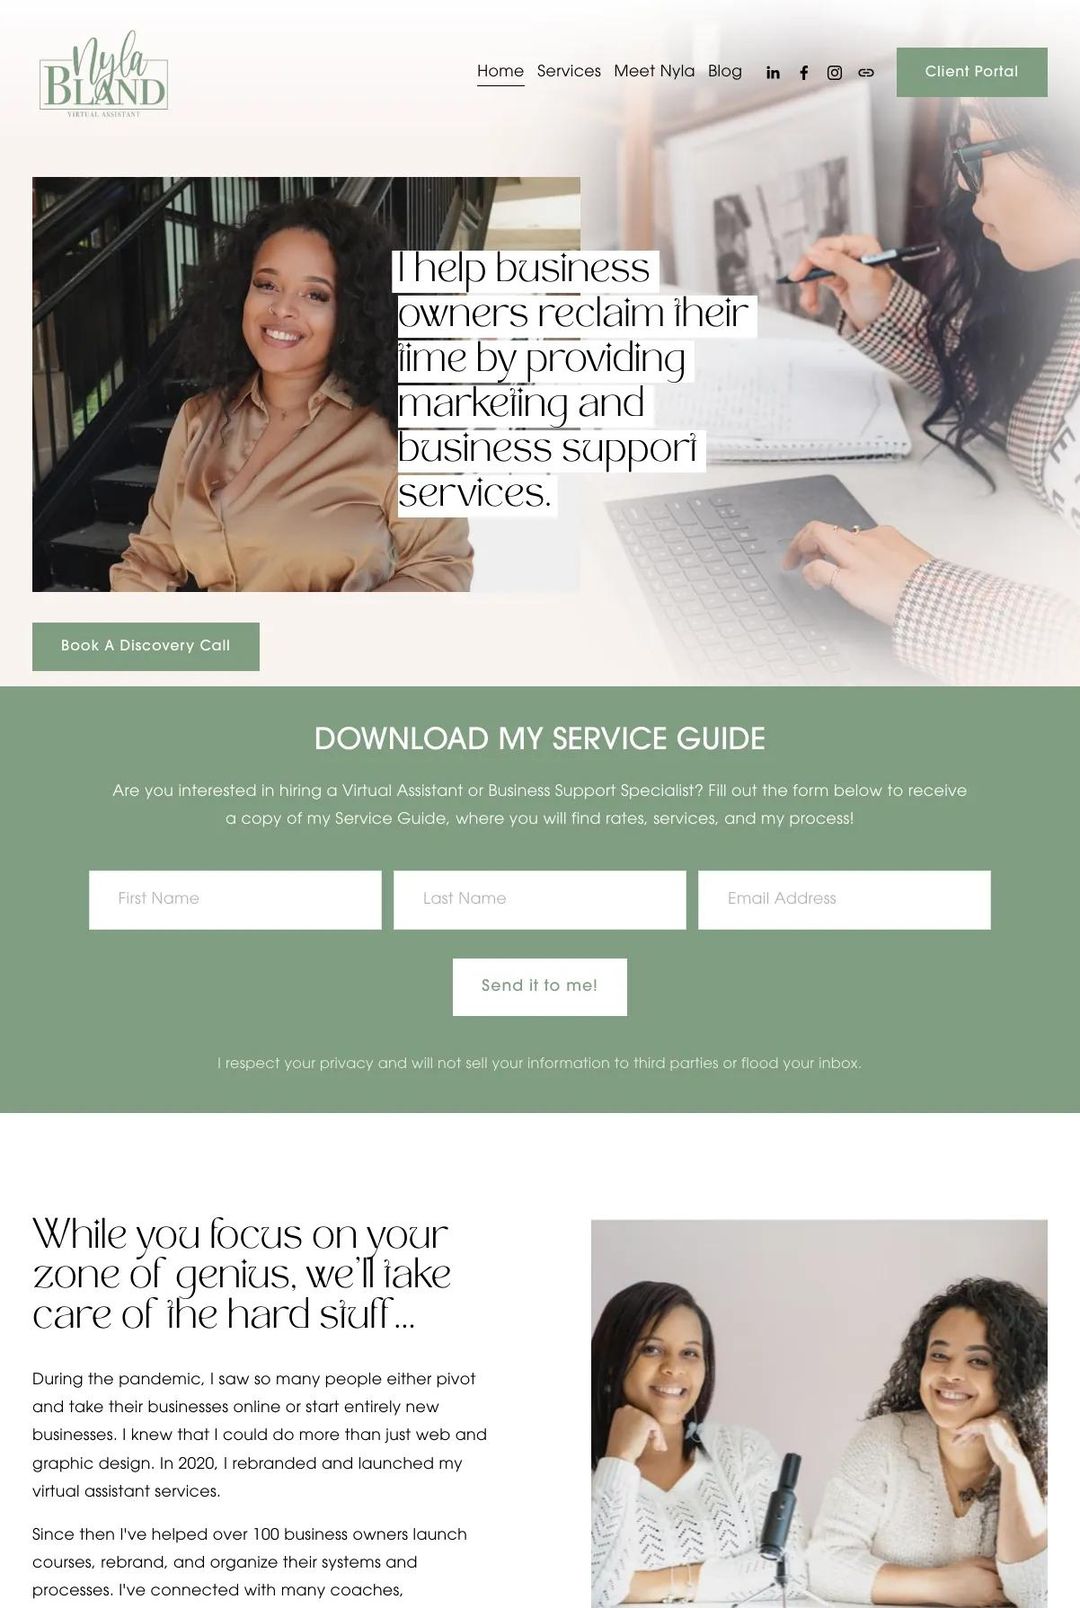 Screenshot 1 of Nyla Bland (Example Squarespace Virtual Assistant Website)